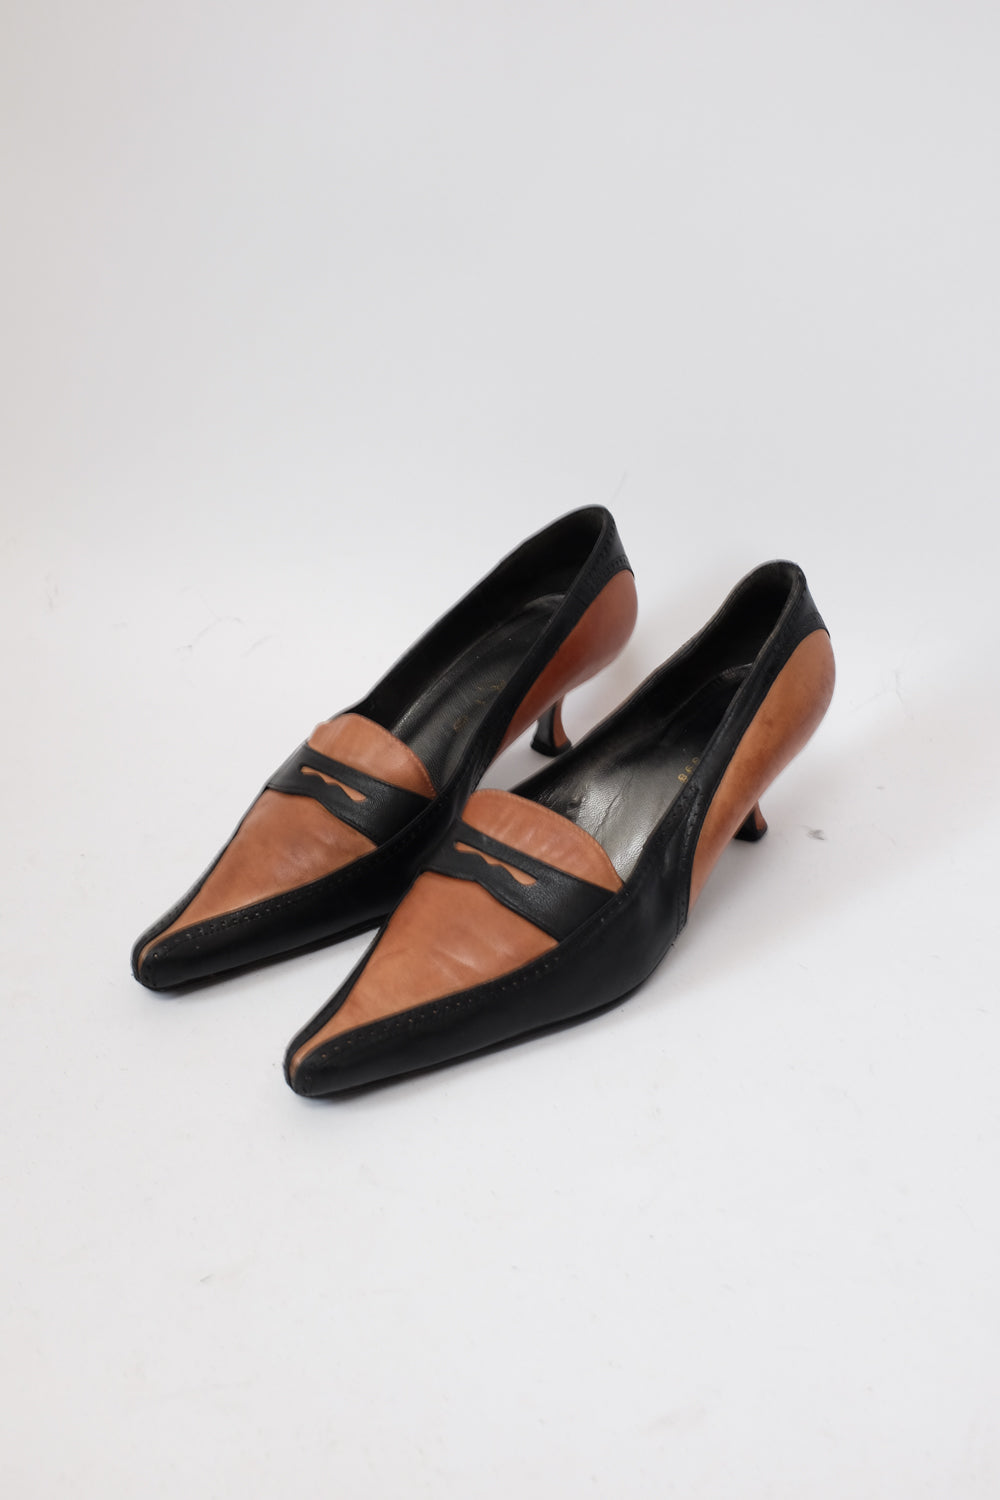 ITALY BLACK LEATHER  FLAT PUMPS 38